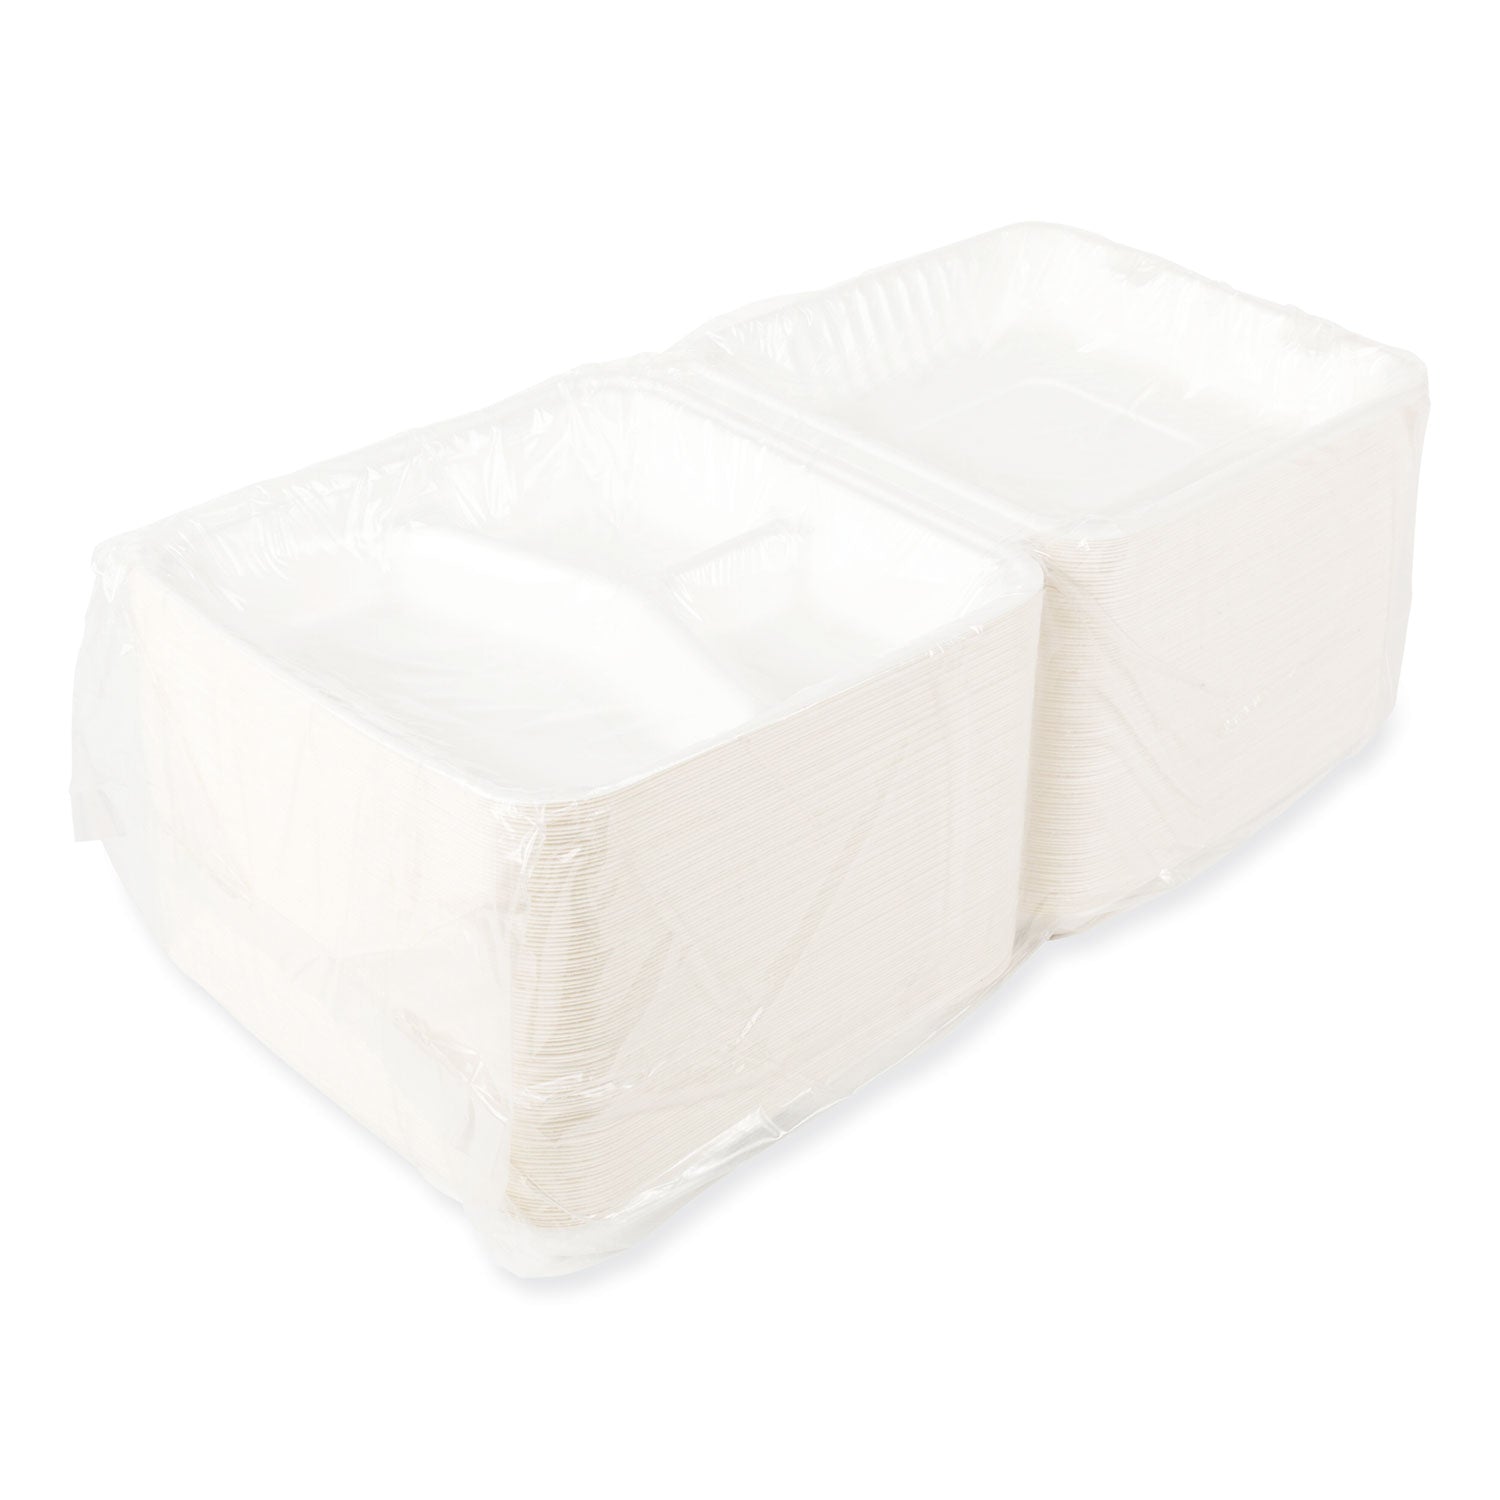 bagasse-pfas-free-food-containers-3-compartment-9-x-9-x-319-white-bamboo-sugarcane-200-carton_rpphl93npfa - 1